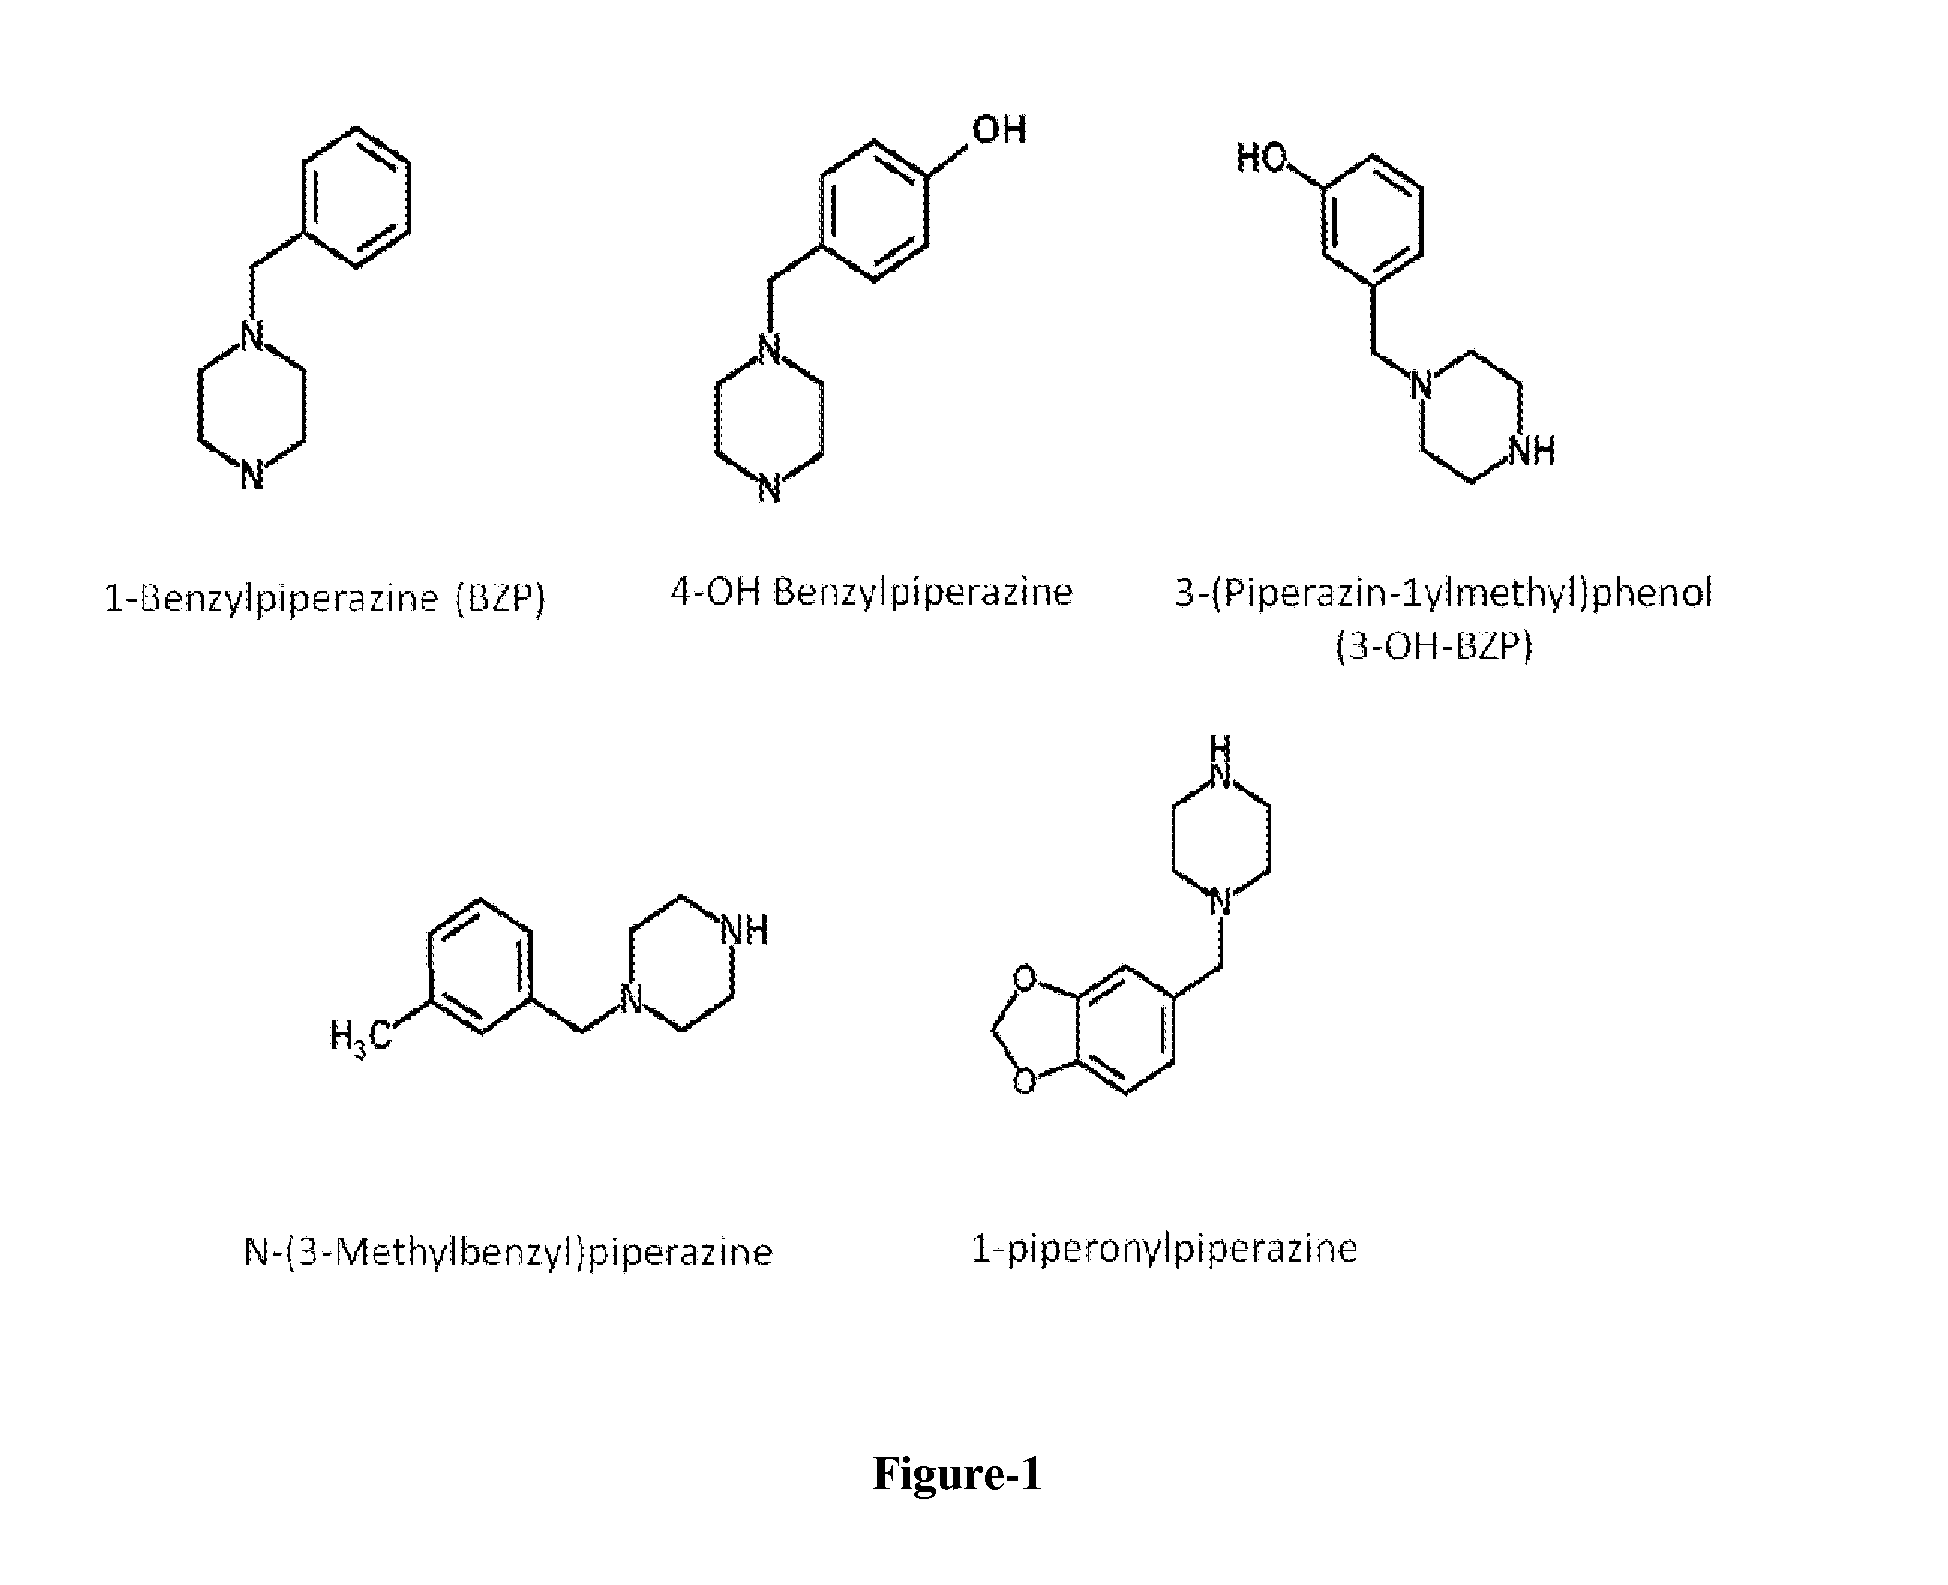 Assay for Benzylpiperazine and Metabolites